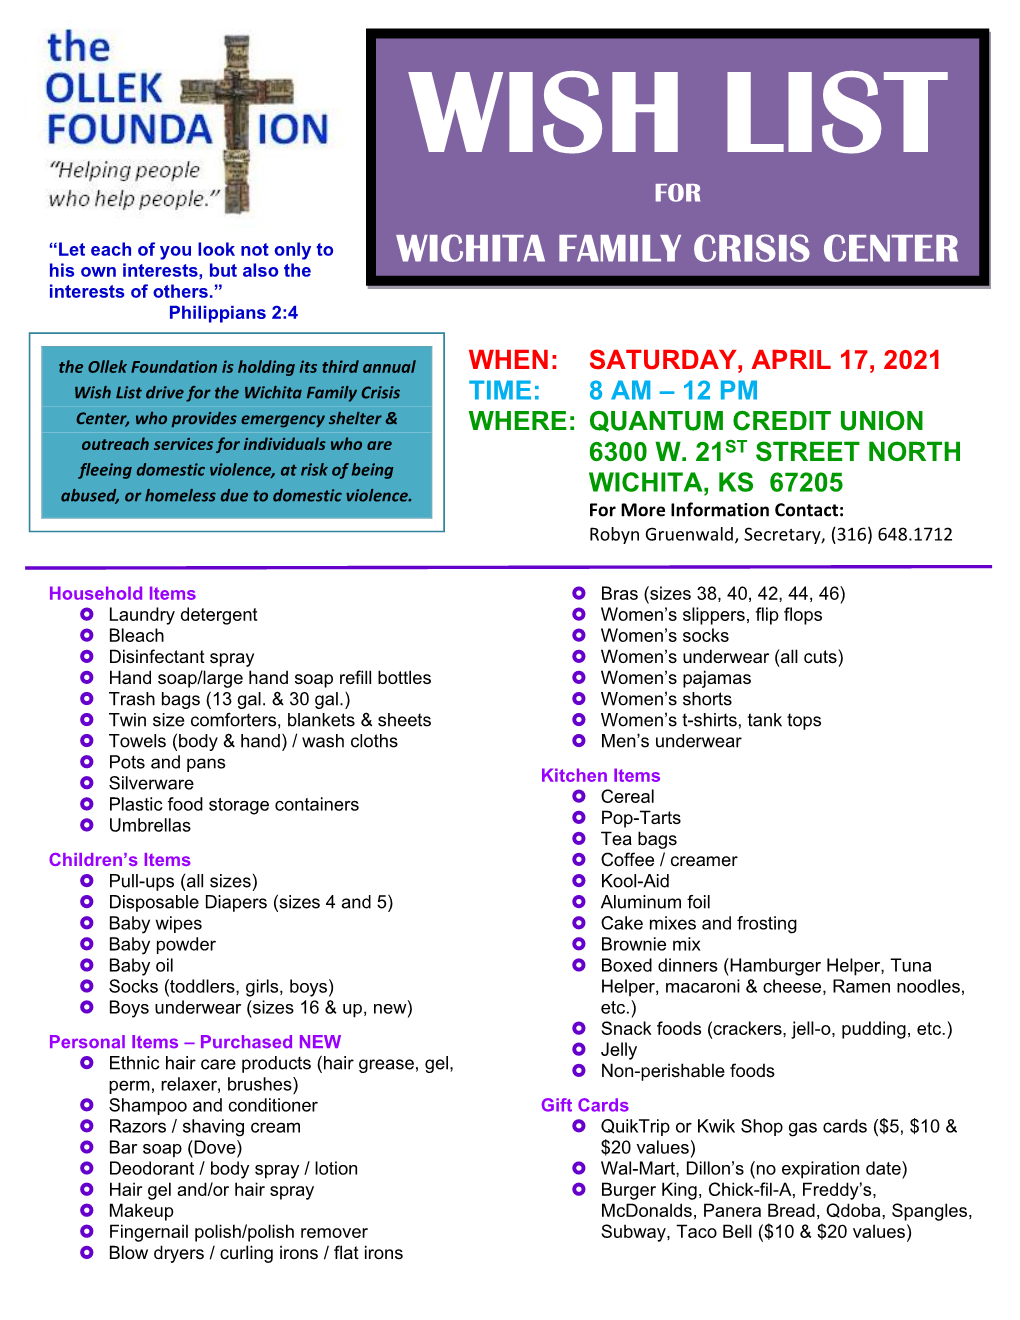 WICHITA FAMILY CRISIS CENTER His Own Interests, but Also the Interests of Others.” Philippians 2:4